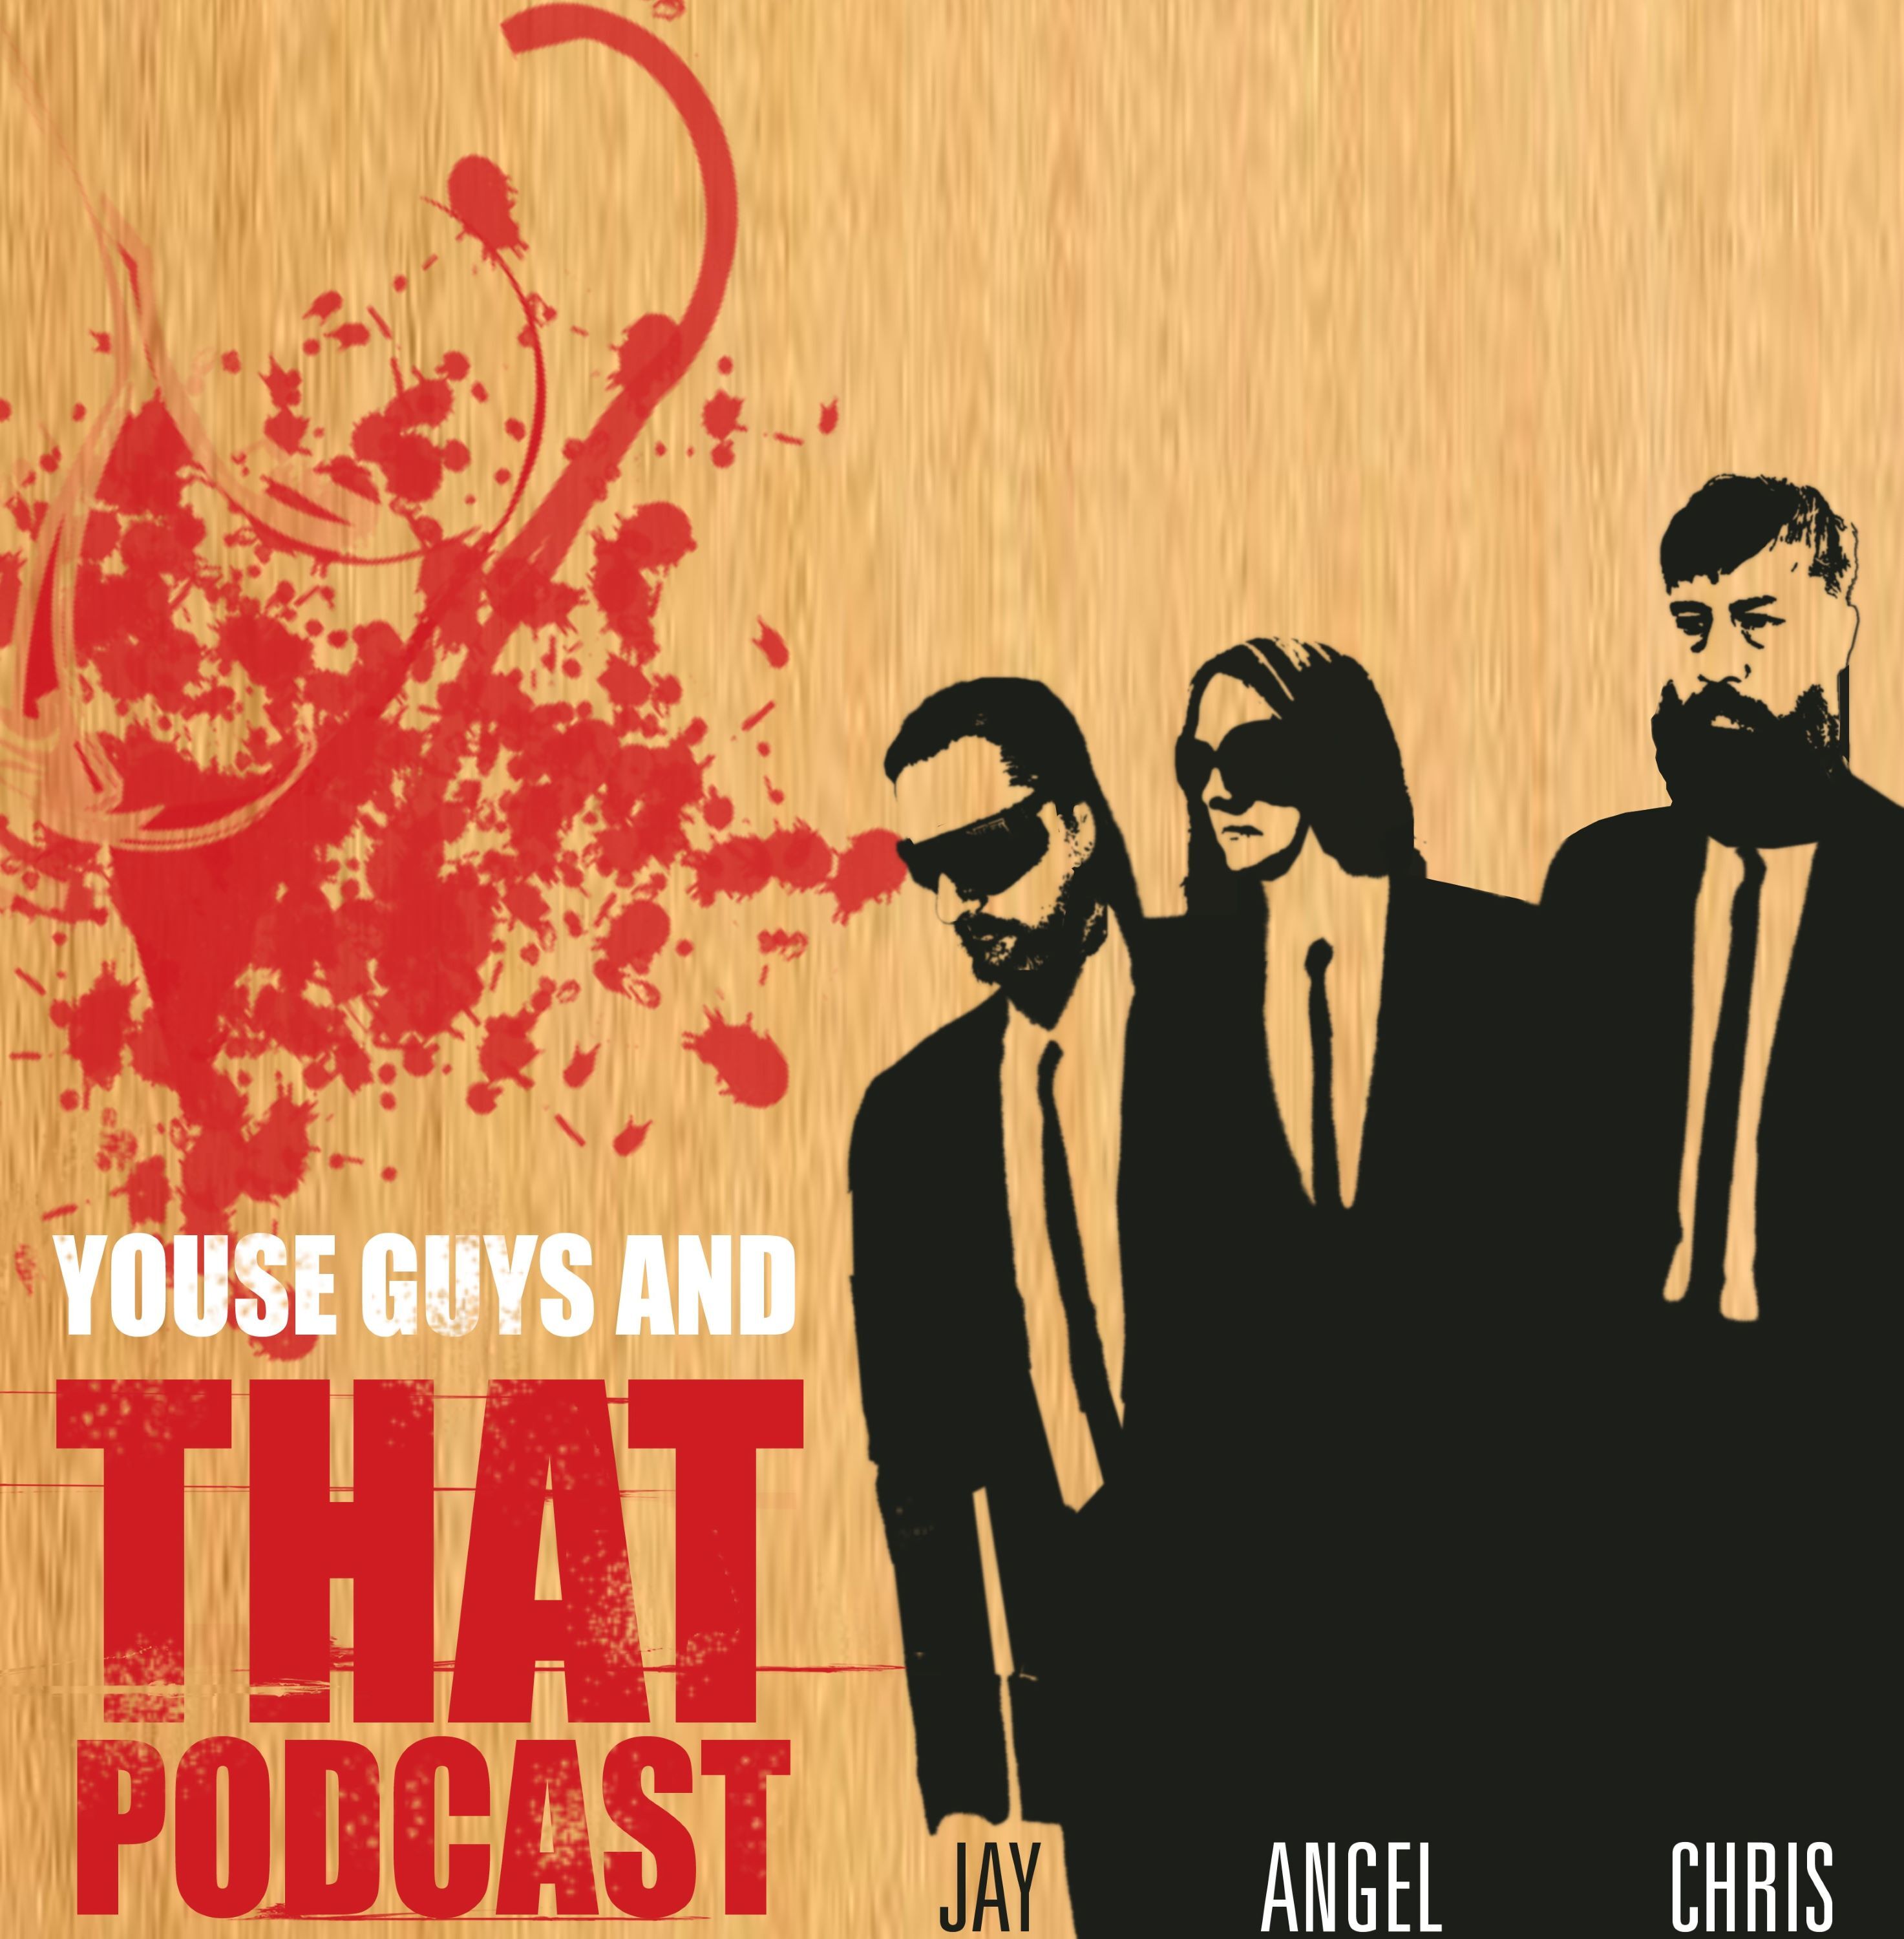 Youse Guys & that Podcast